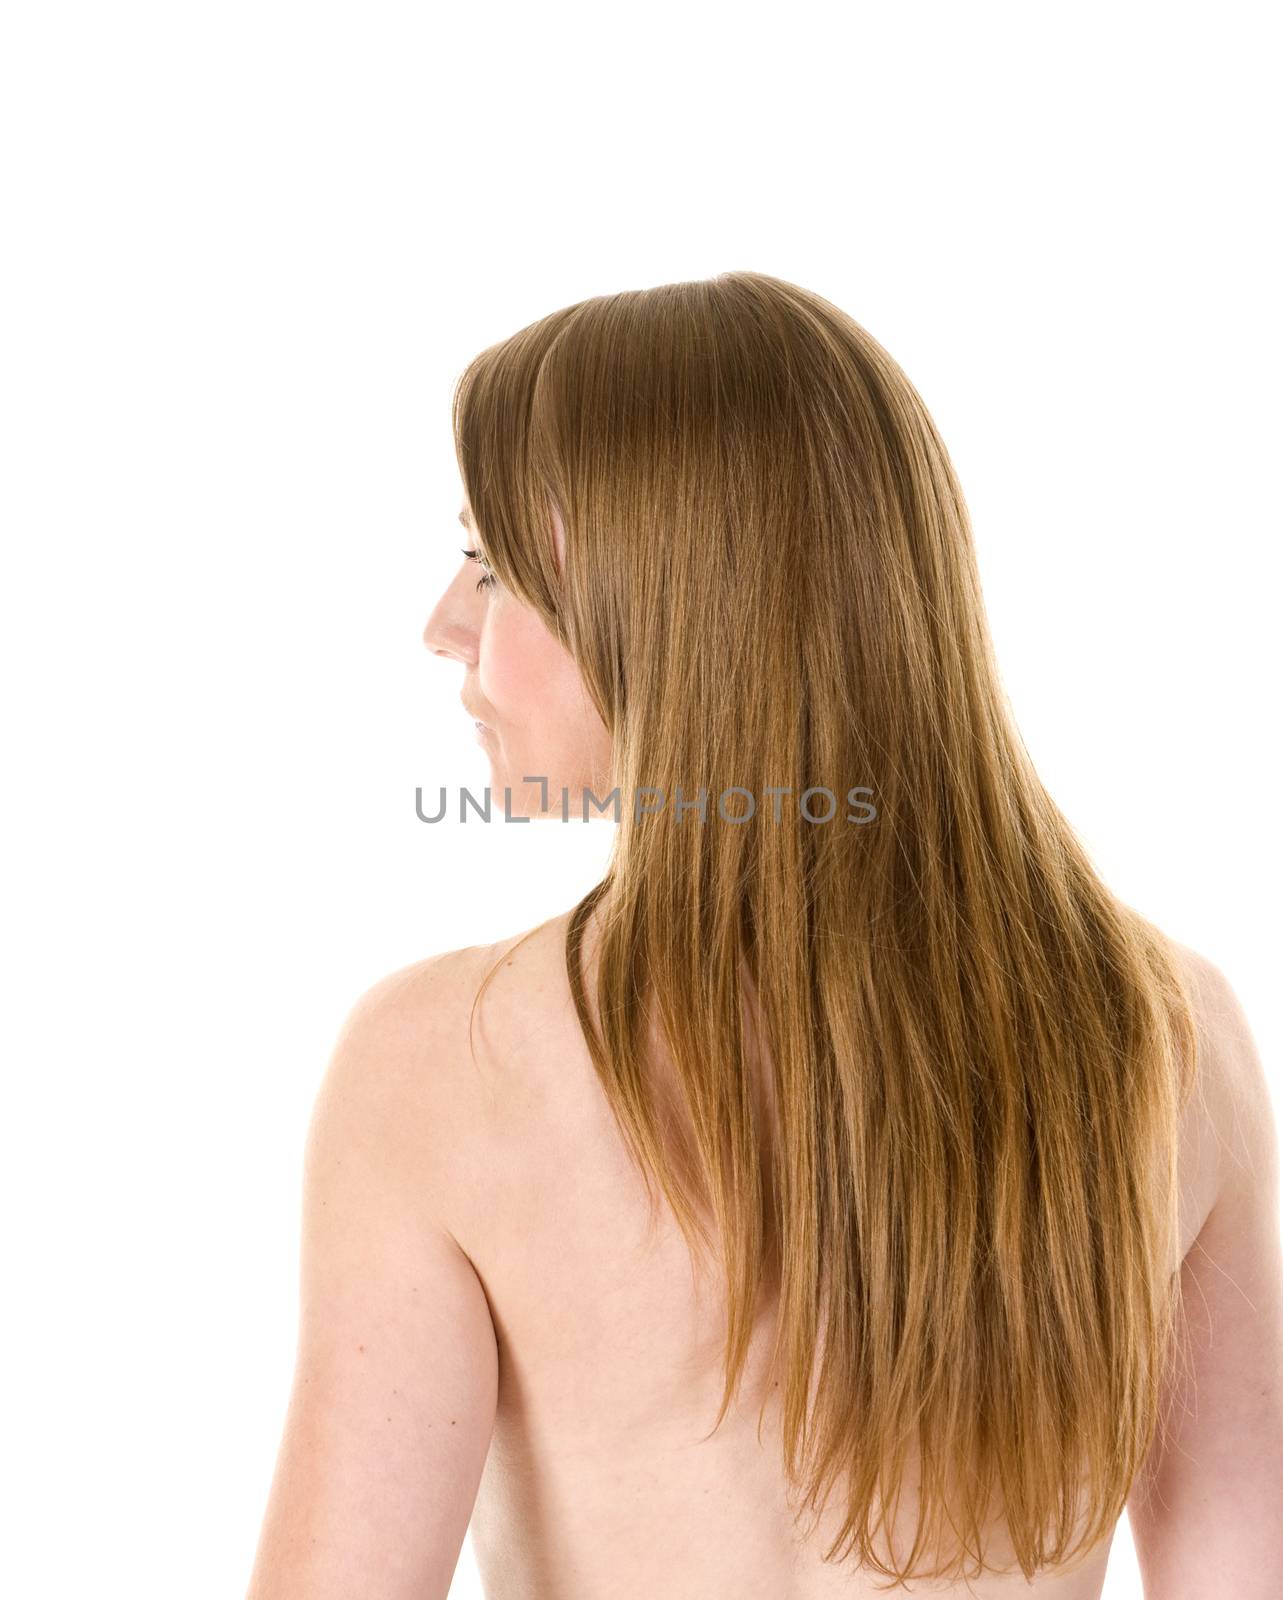 Rear view of head and shoulders of an attractive woman